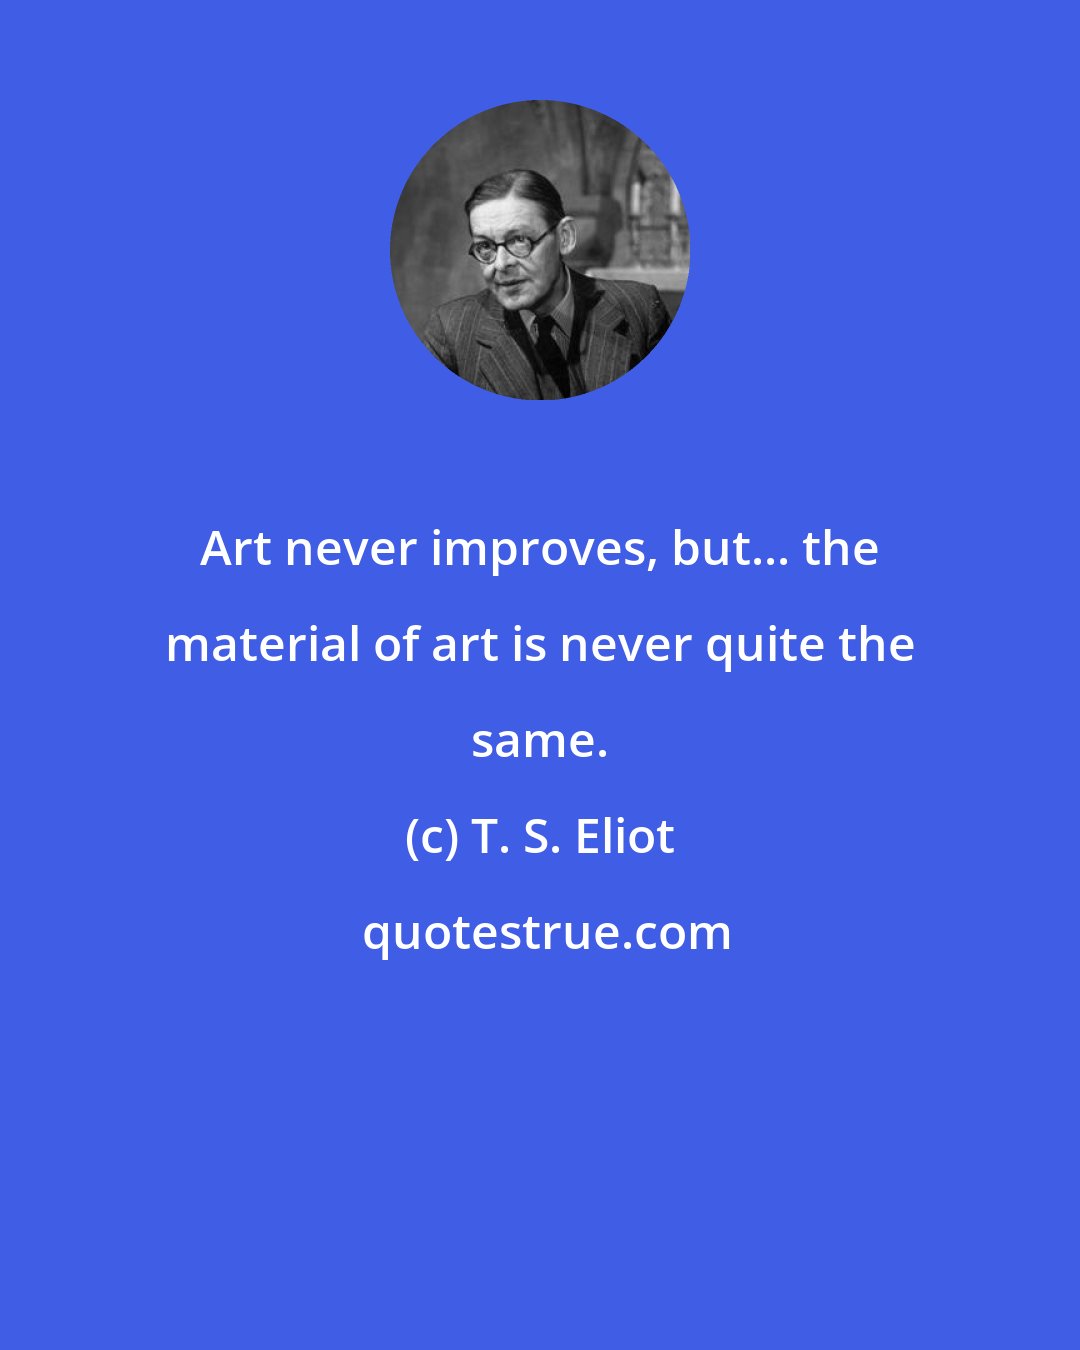 T. S. Eliot: Art never improves, but... the material of art is never quite the same.